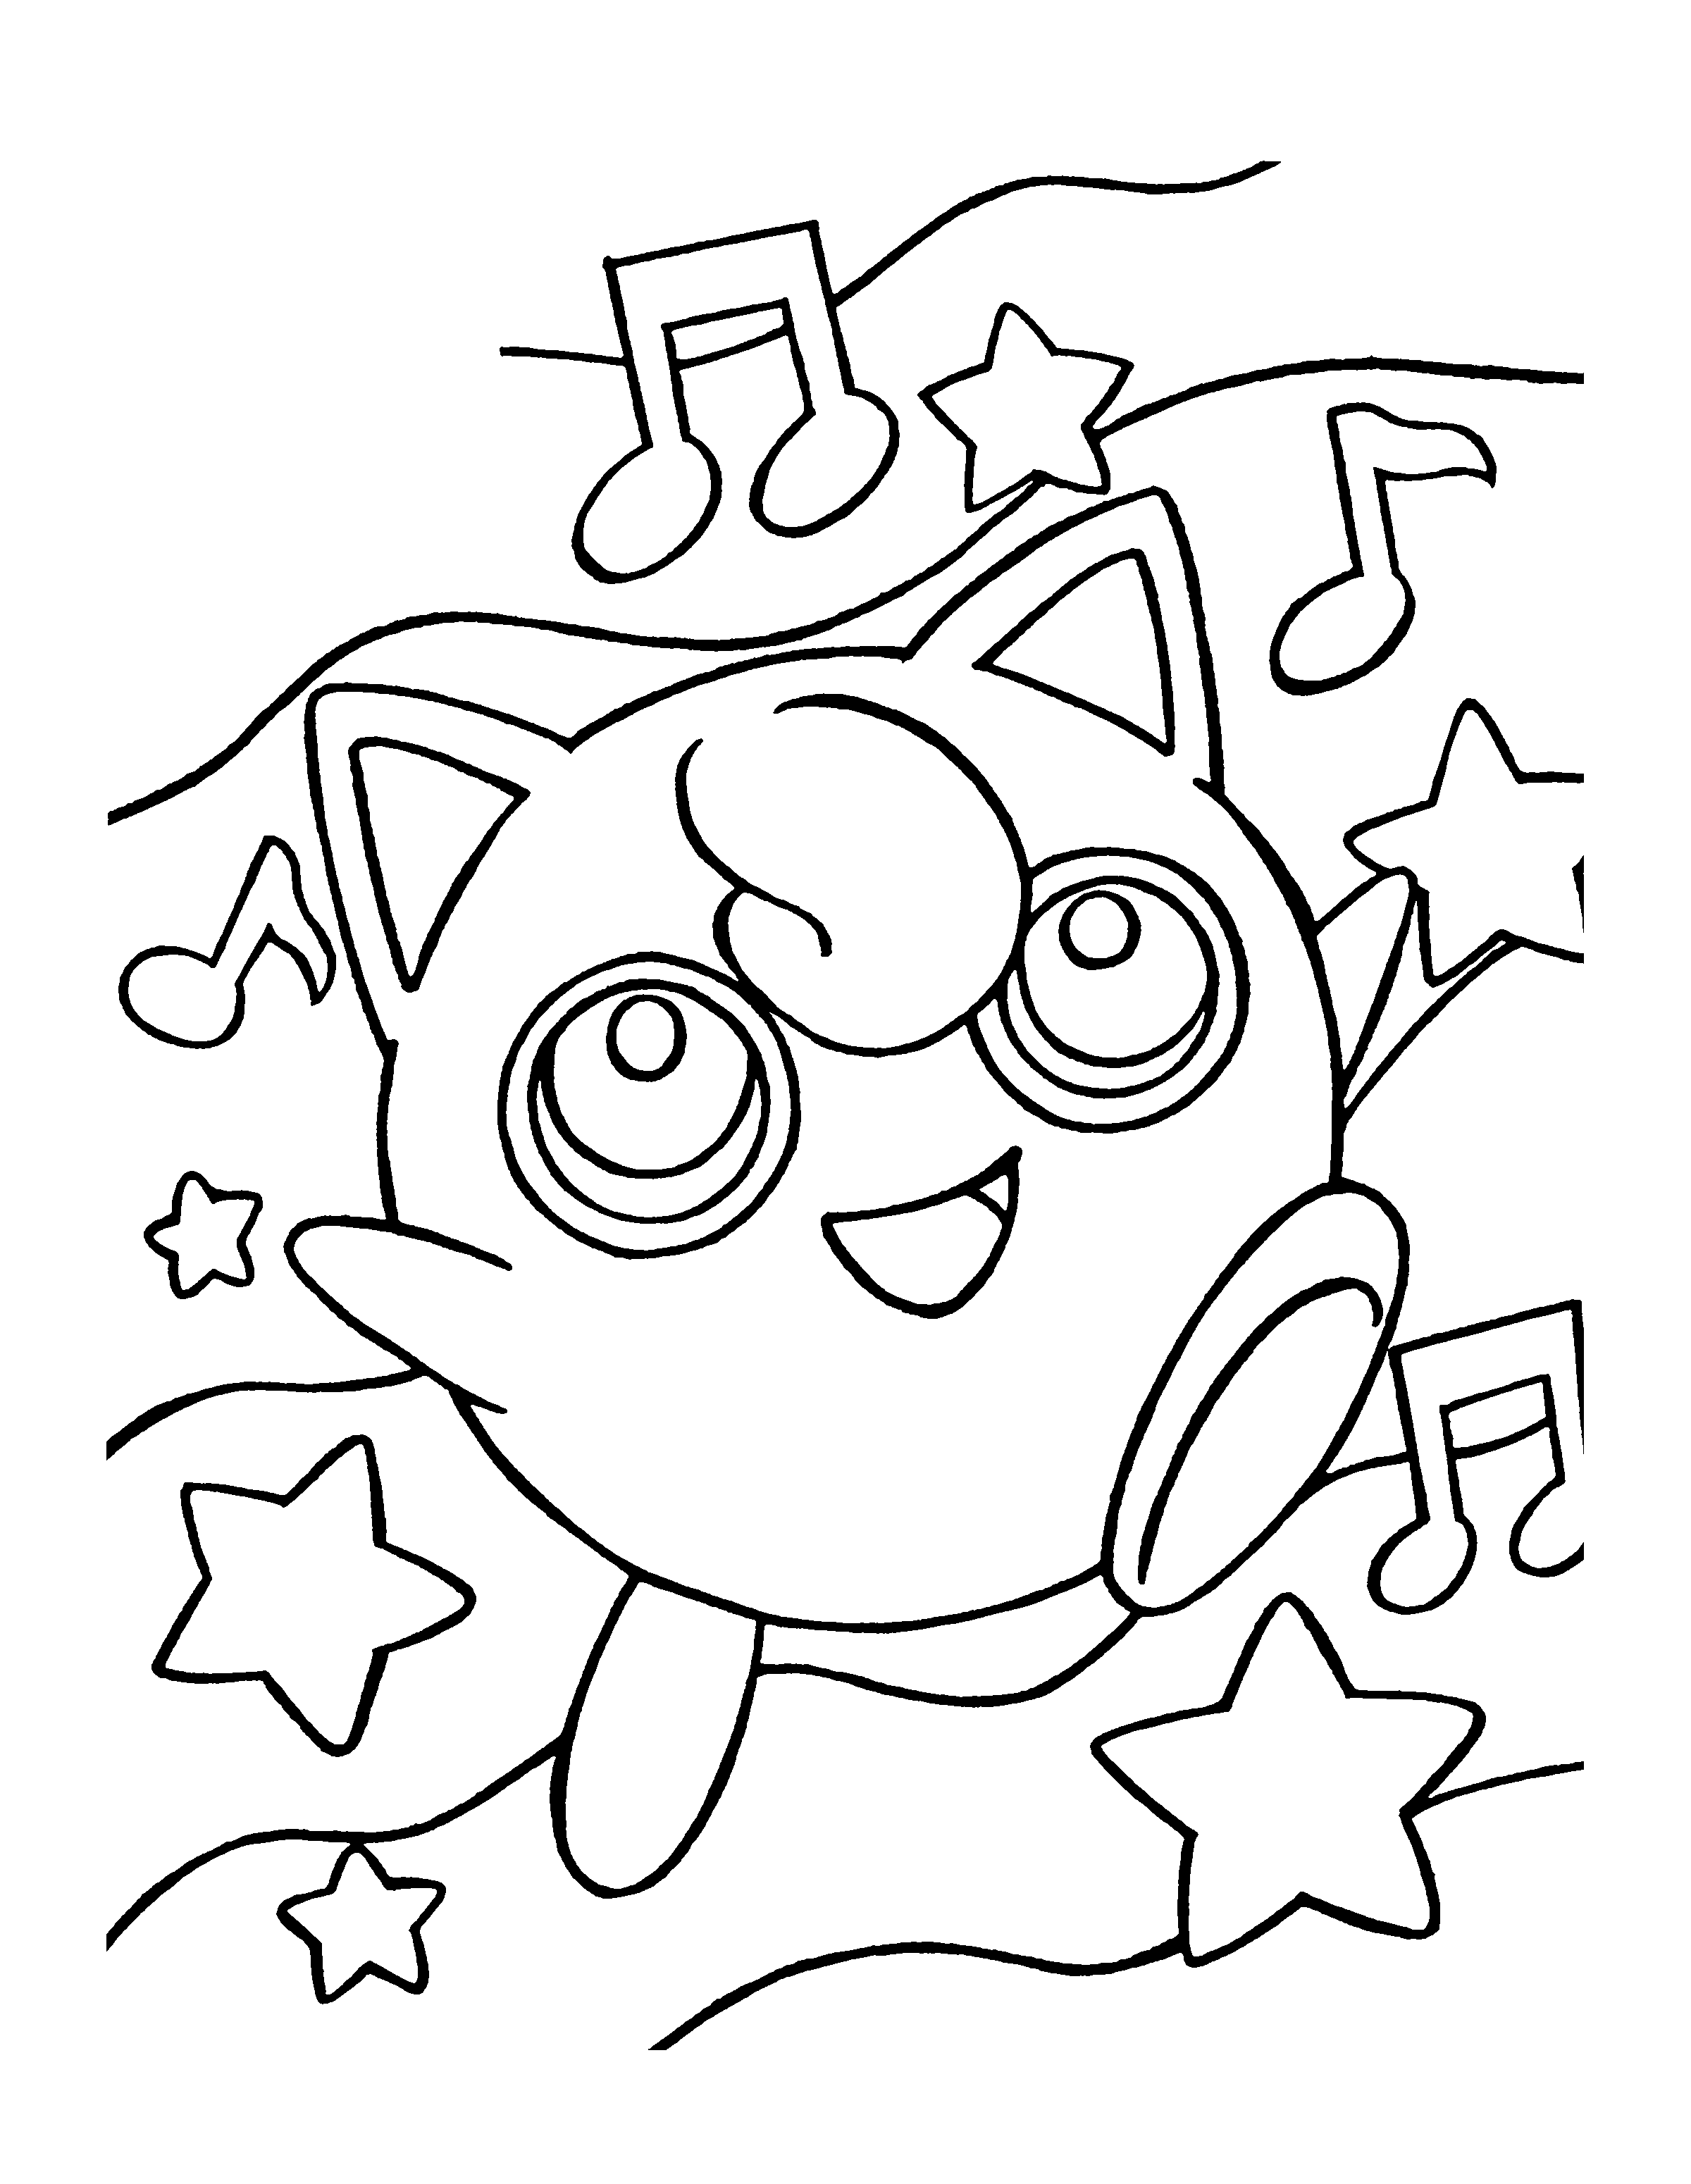 Free Pokemon Coloring Pages For Adults Download Free Pokemon 